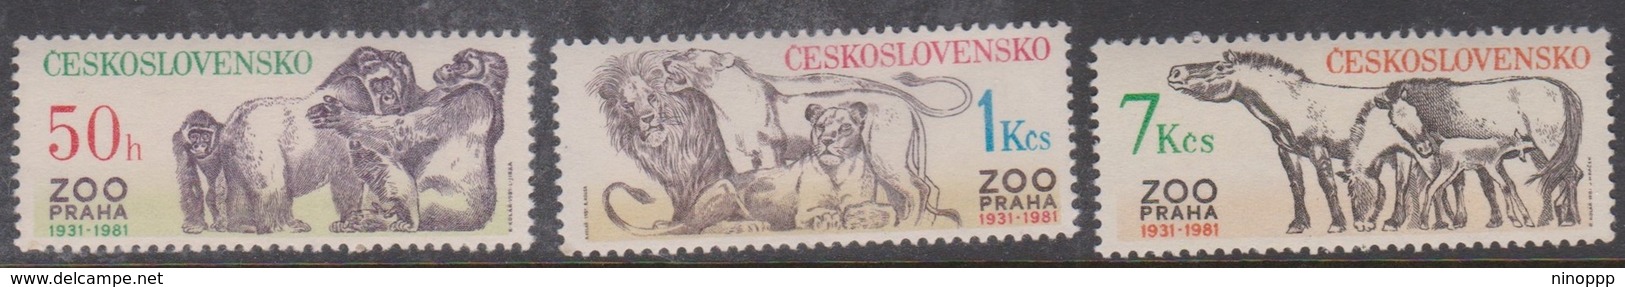 Czechoslovakia SG 2595-2597 1981 50th Anniversary Prague Zoo, Mint Never Hinged - Unused Stamps